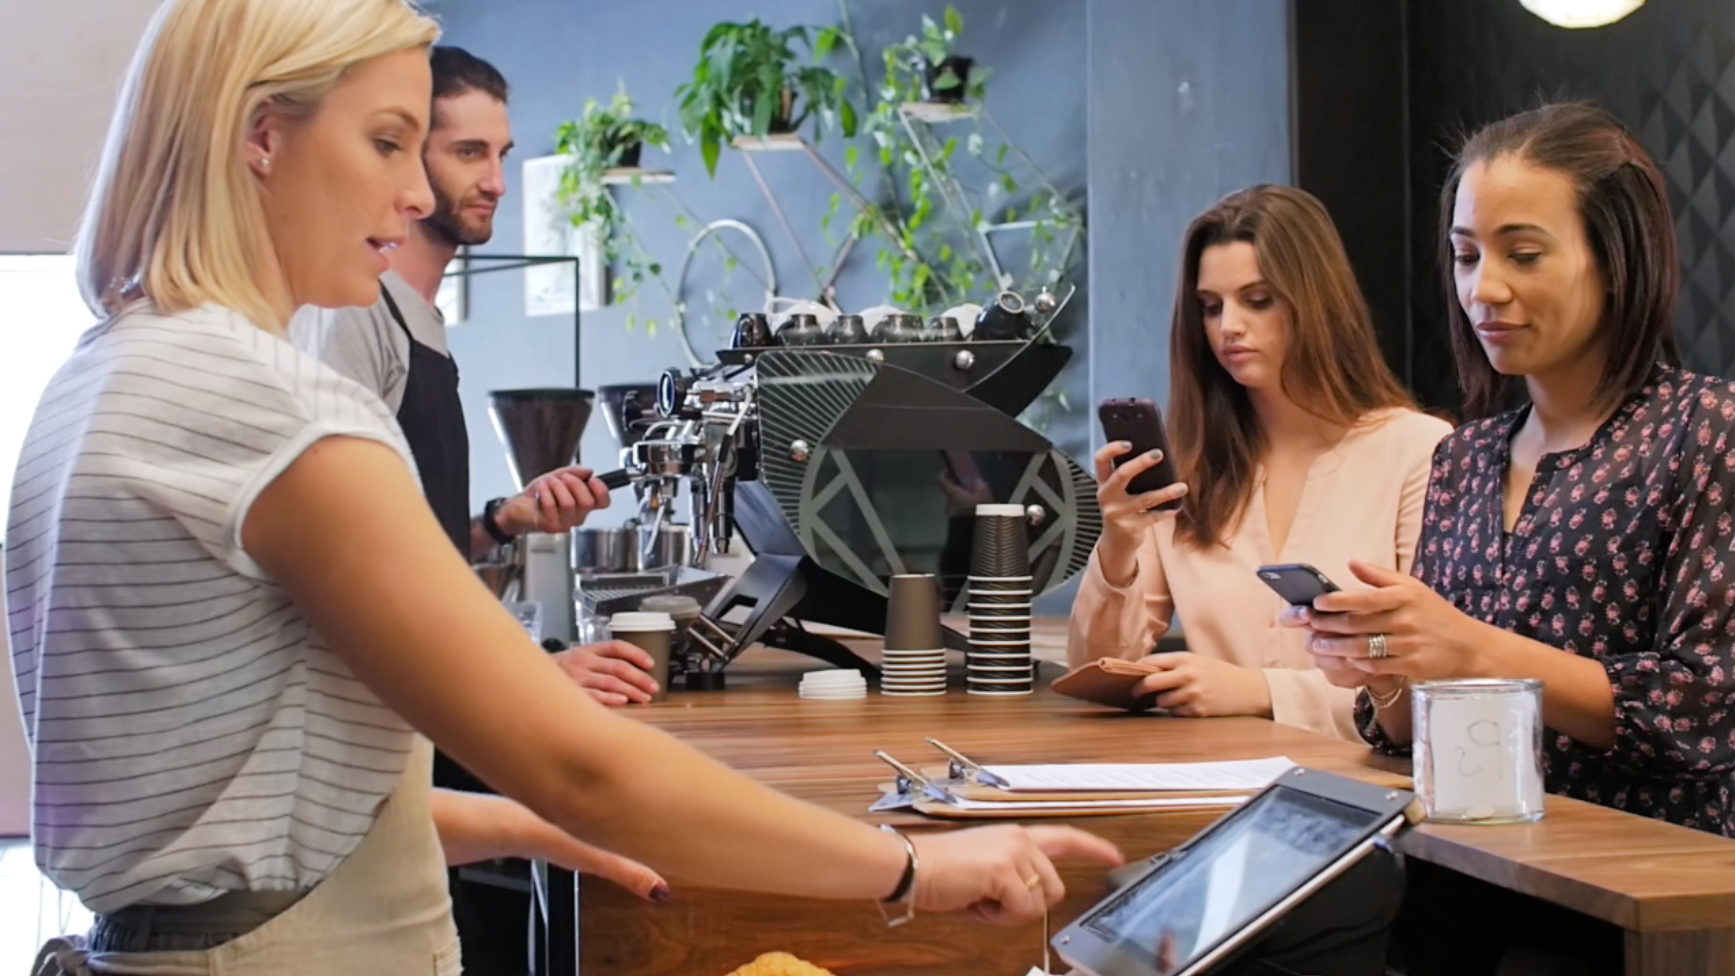 Mobile Payment App LevelUp Secures $50 Million